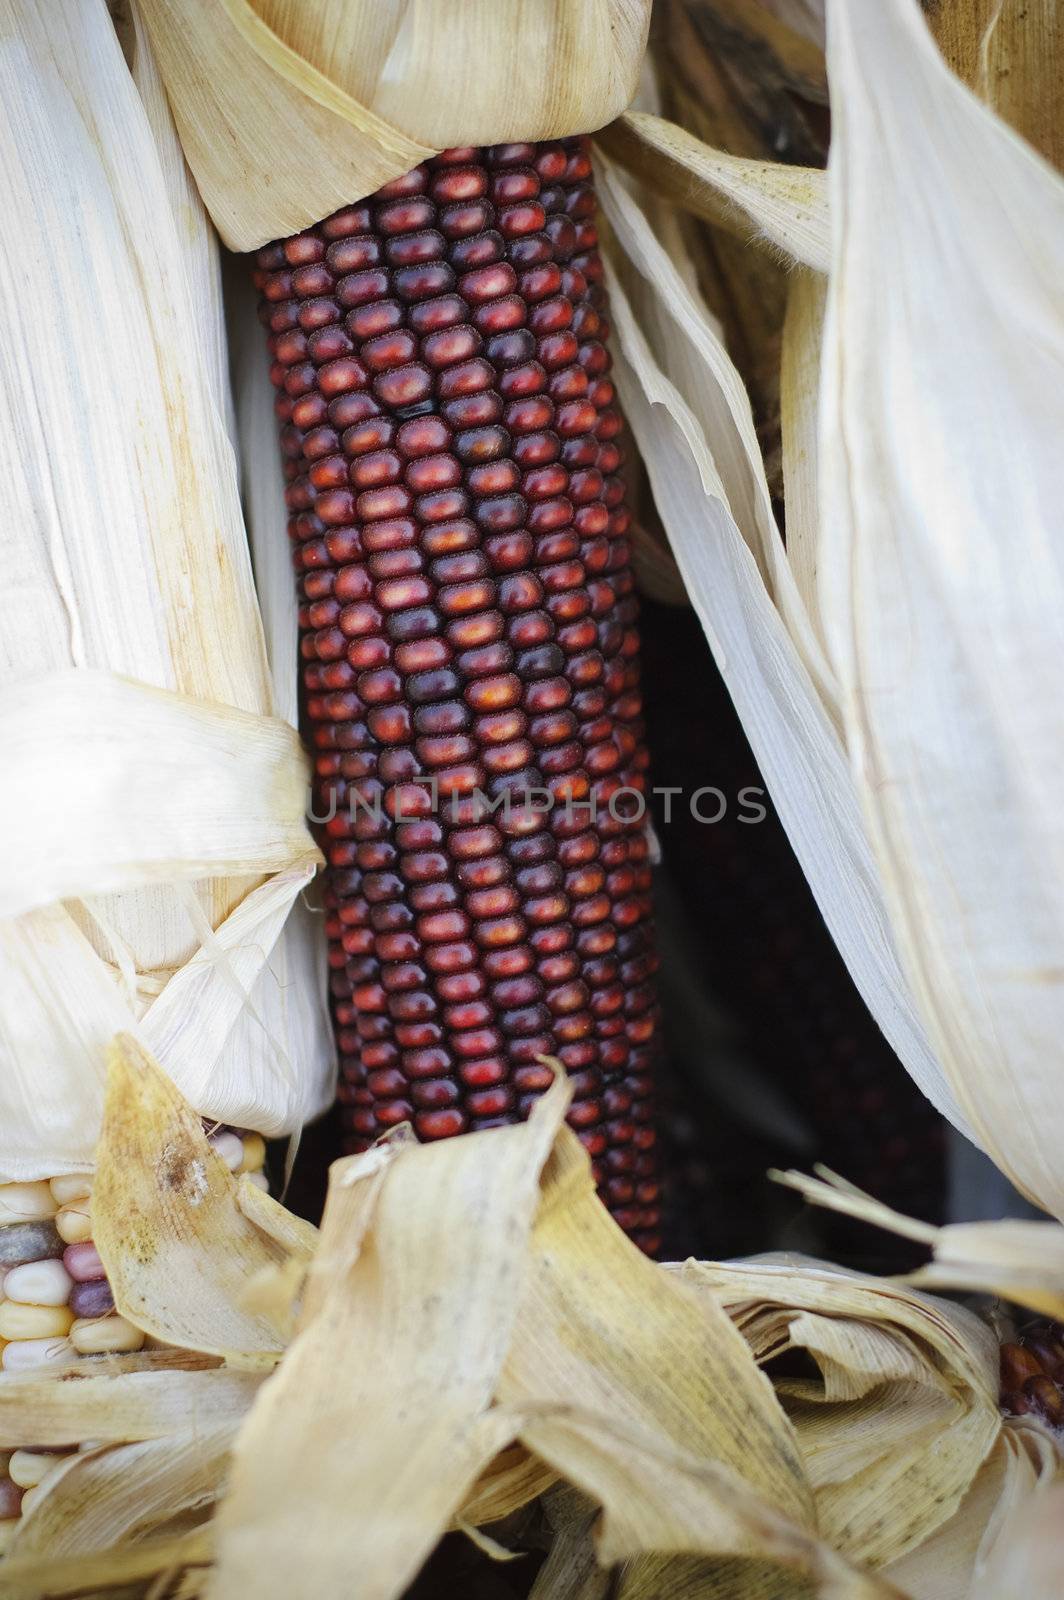 Ear of indian red corn close-up, shuck